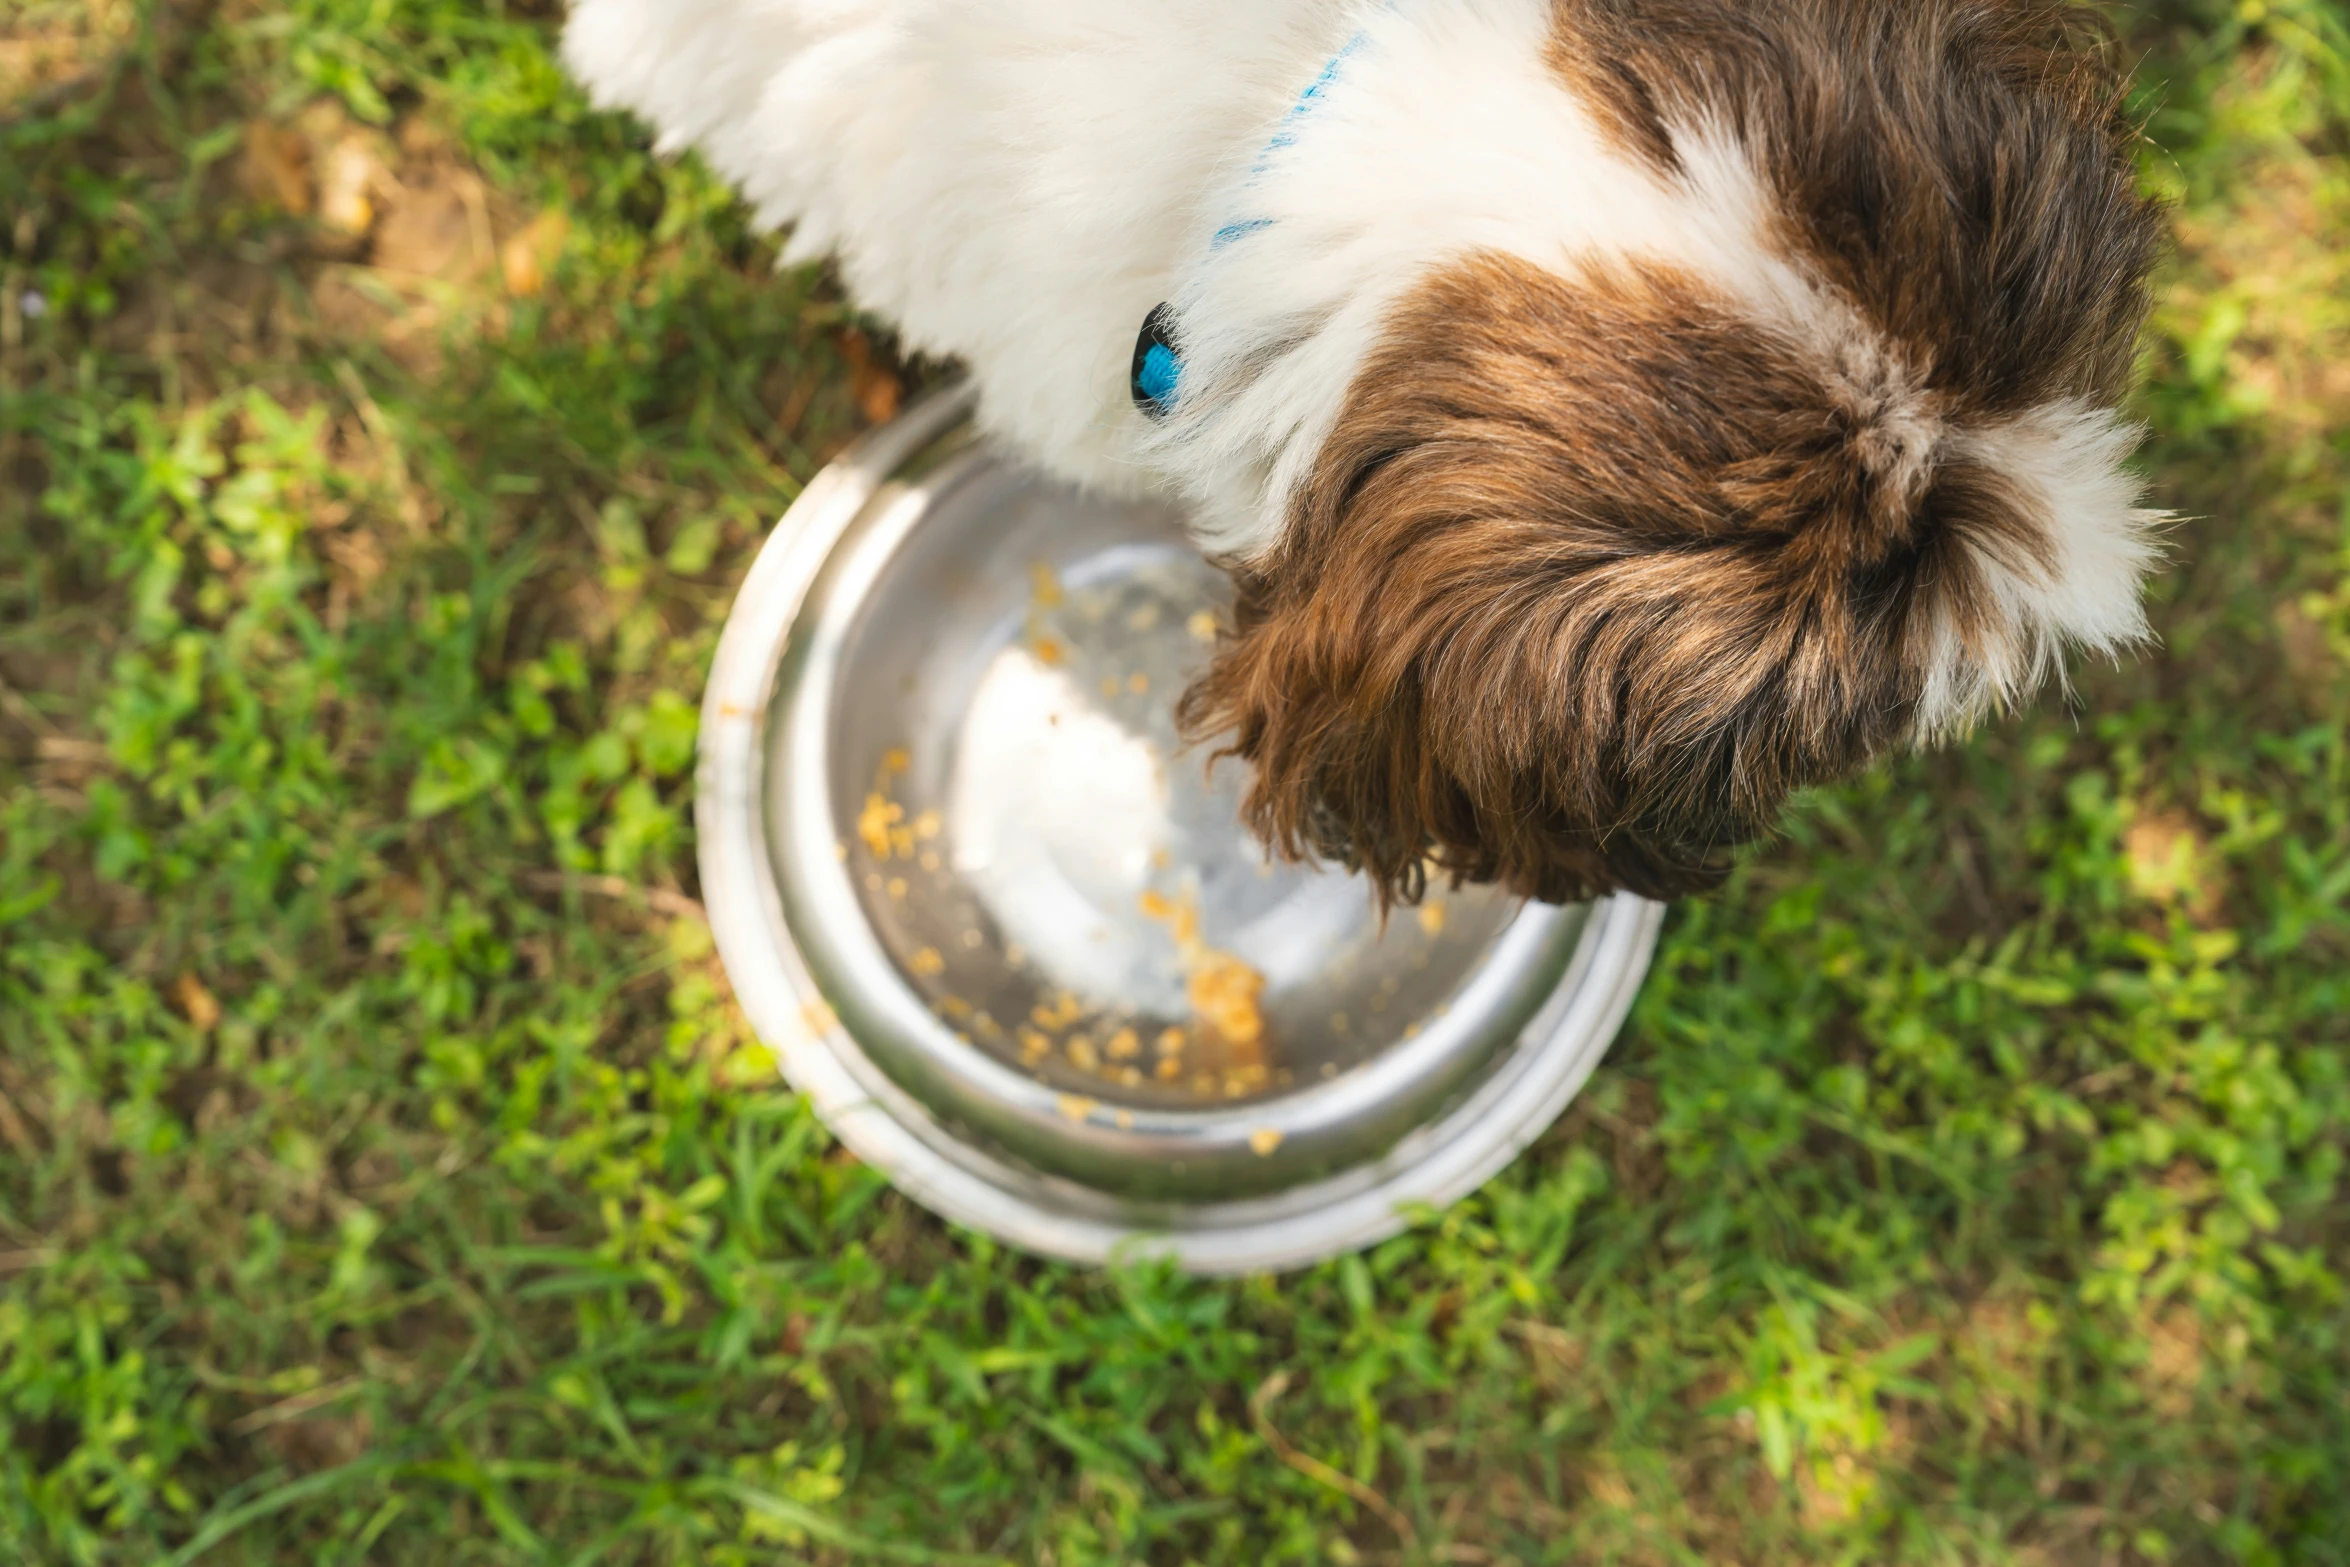 a small white and brown dog eating out of a metal bowl